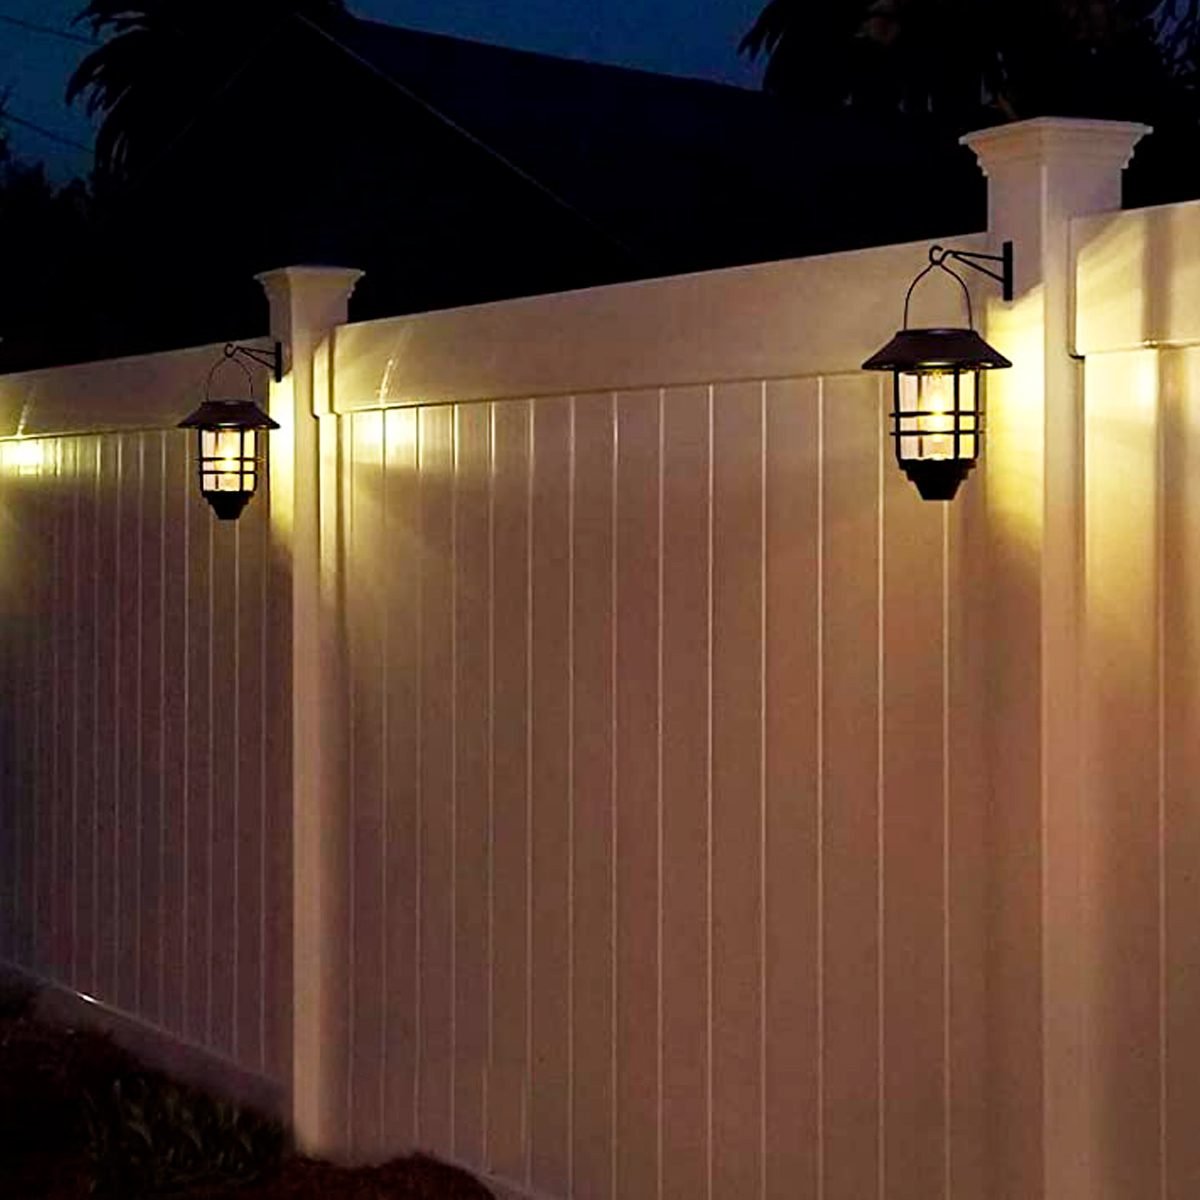 https://www.familyhandyman.com/wp-content/uploads/2022/05/Solar_Lantern-Outdoor-Lights-Hanging-Wireless-and-Waterproof-Lantern_lights-with-Wall-Mount-Kit-for_Garden-Porch-or-Fence-ecomm_amazon.com_.jpg